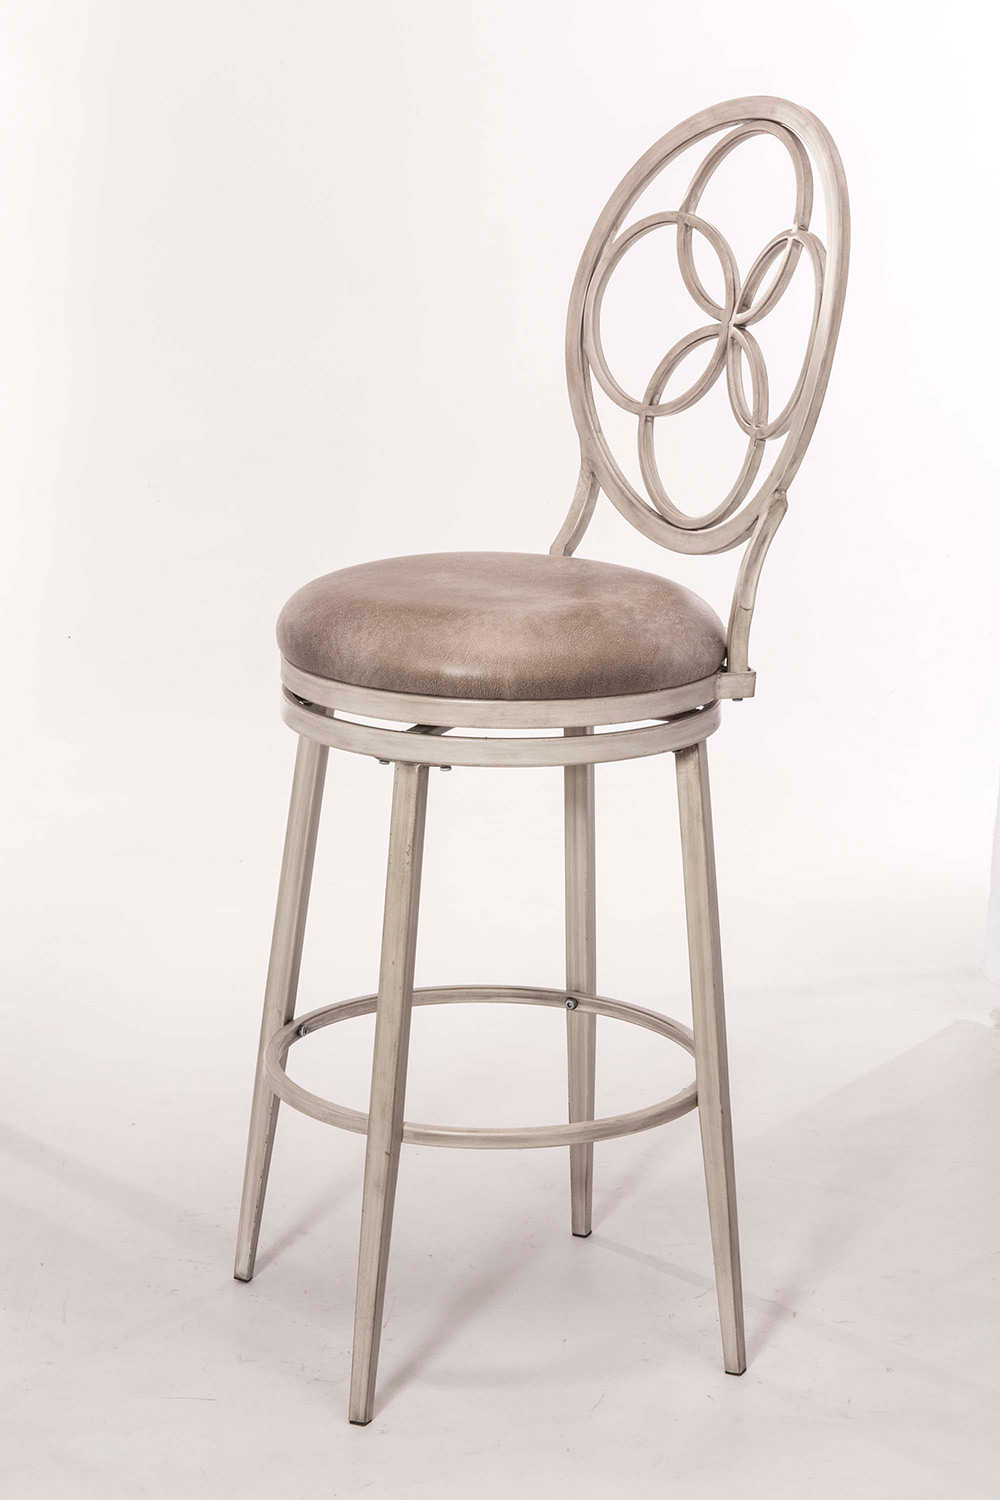 Hillsdale Donnelly Swivel Bar Stool - Weathered Gray